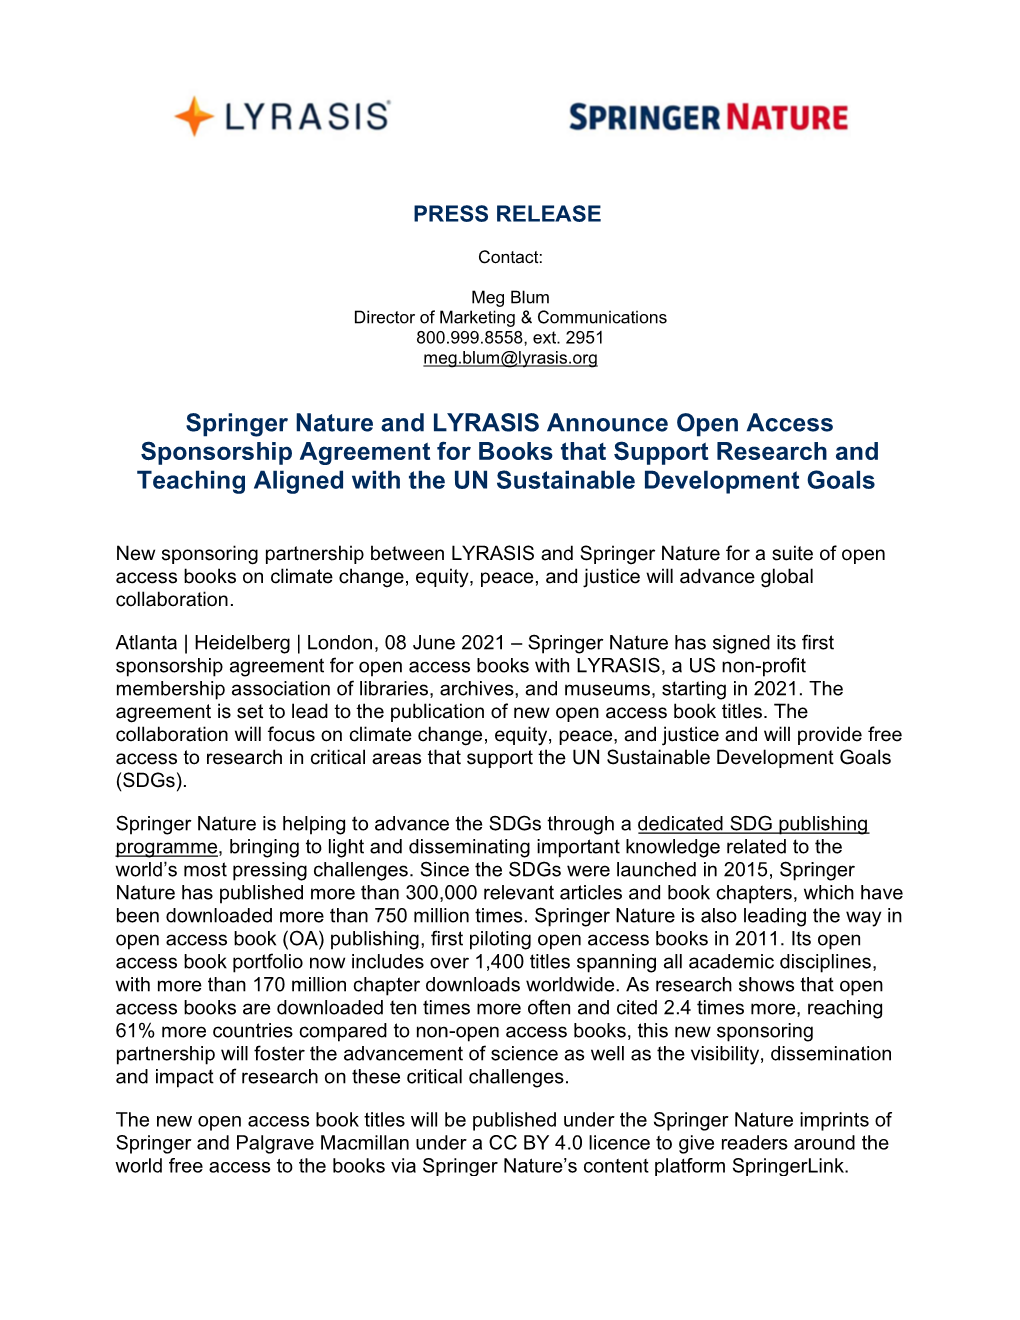 Springer Nature and LYRASIS Announce Open Access Sponsorship Agreement for Books That Support Research and Teaching Aligned with the UN Sustainable Development Goals